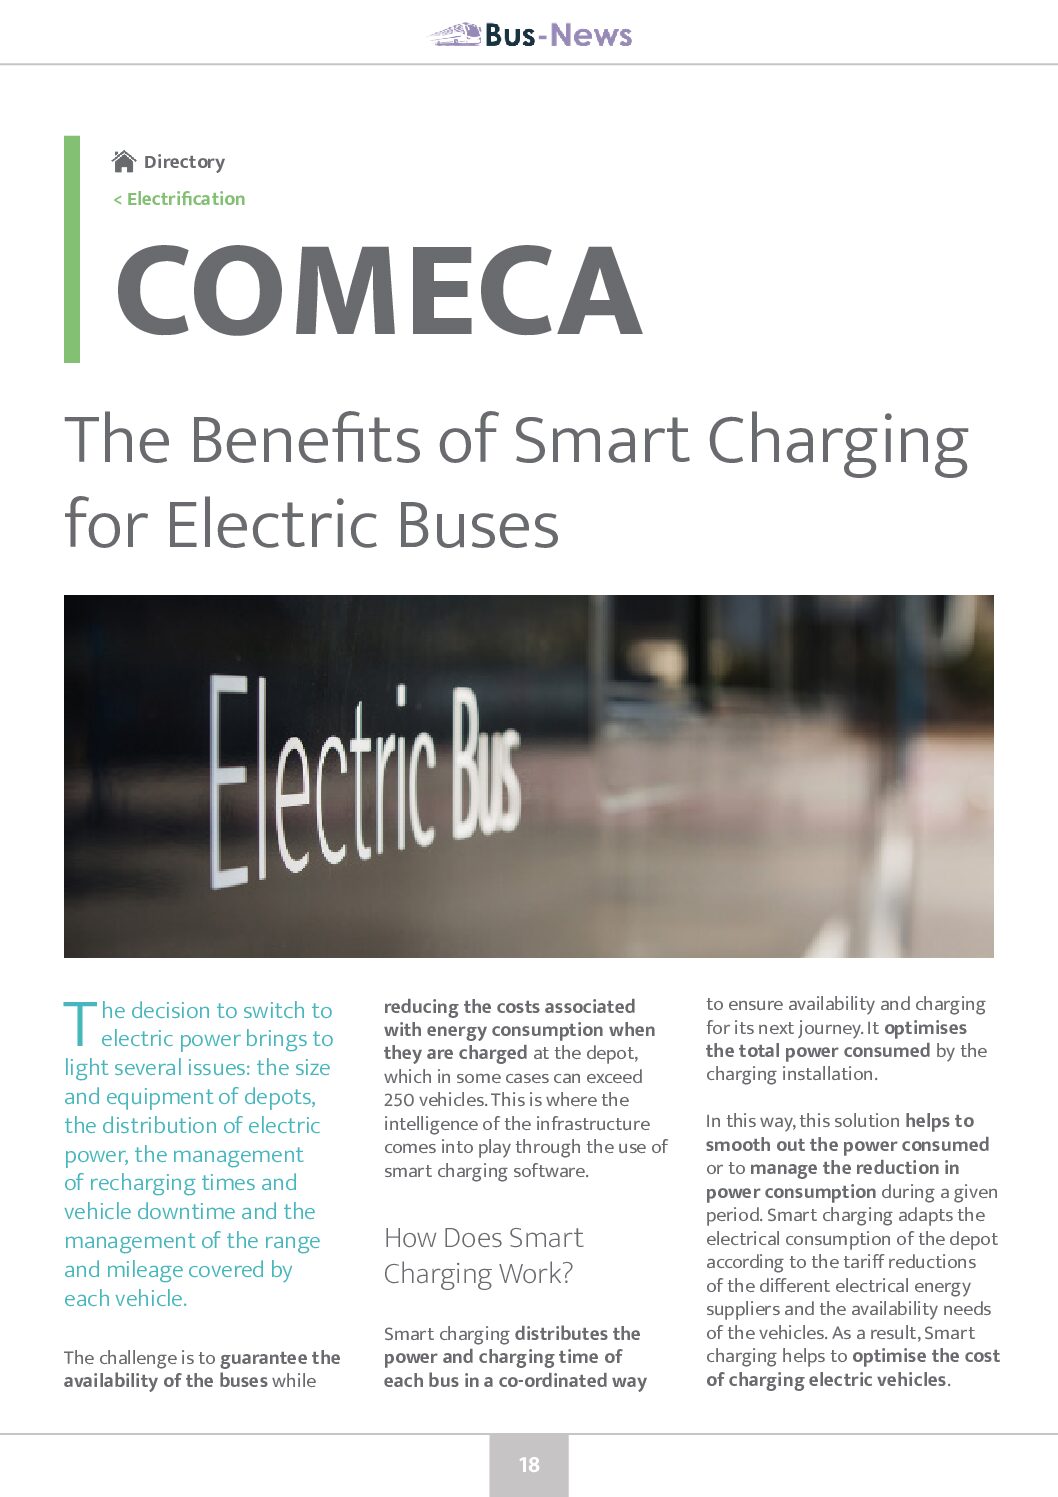 COMECA – The Benefits of Smart Charging for Electric Buses